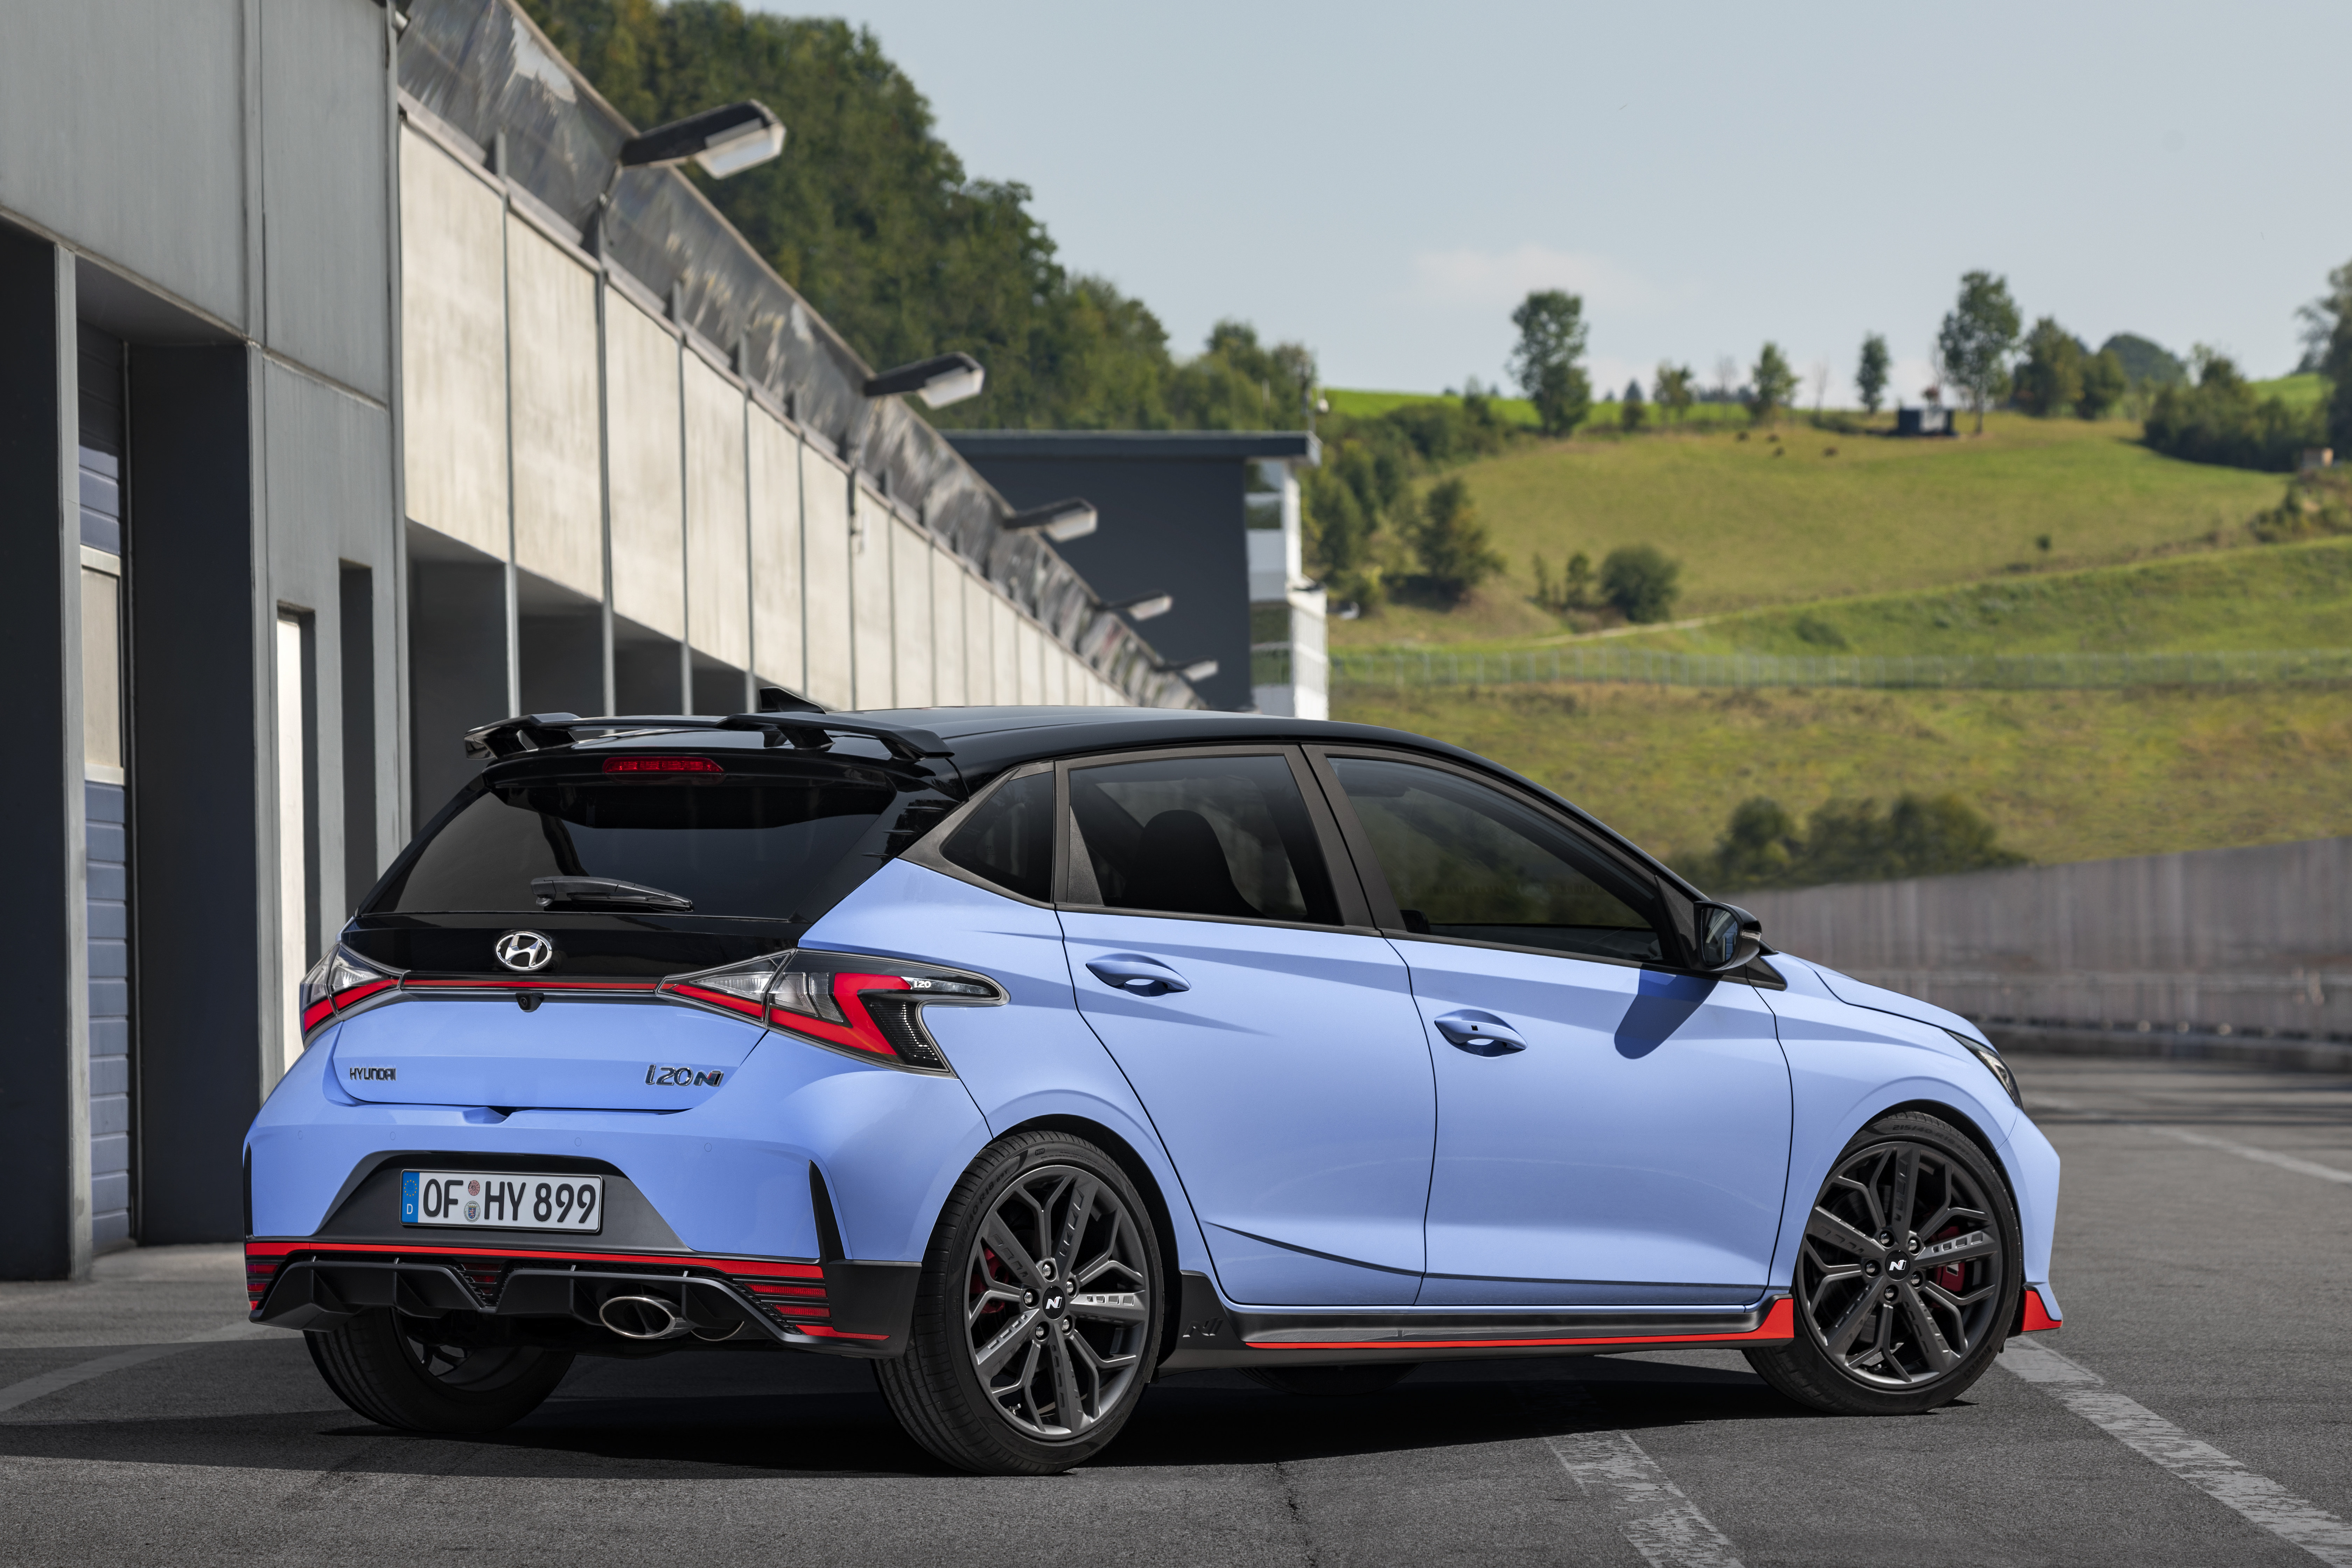 The Hyundai i20N is also going